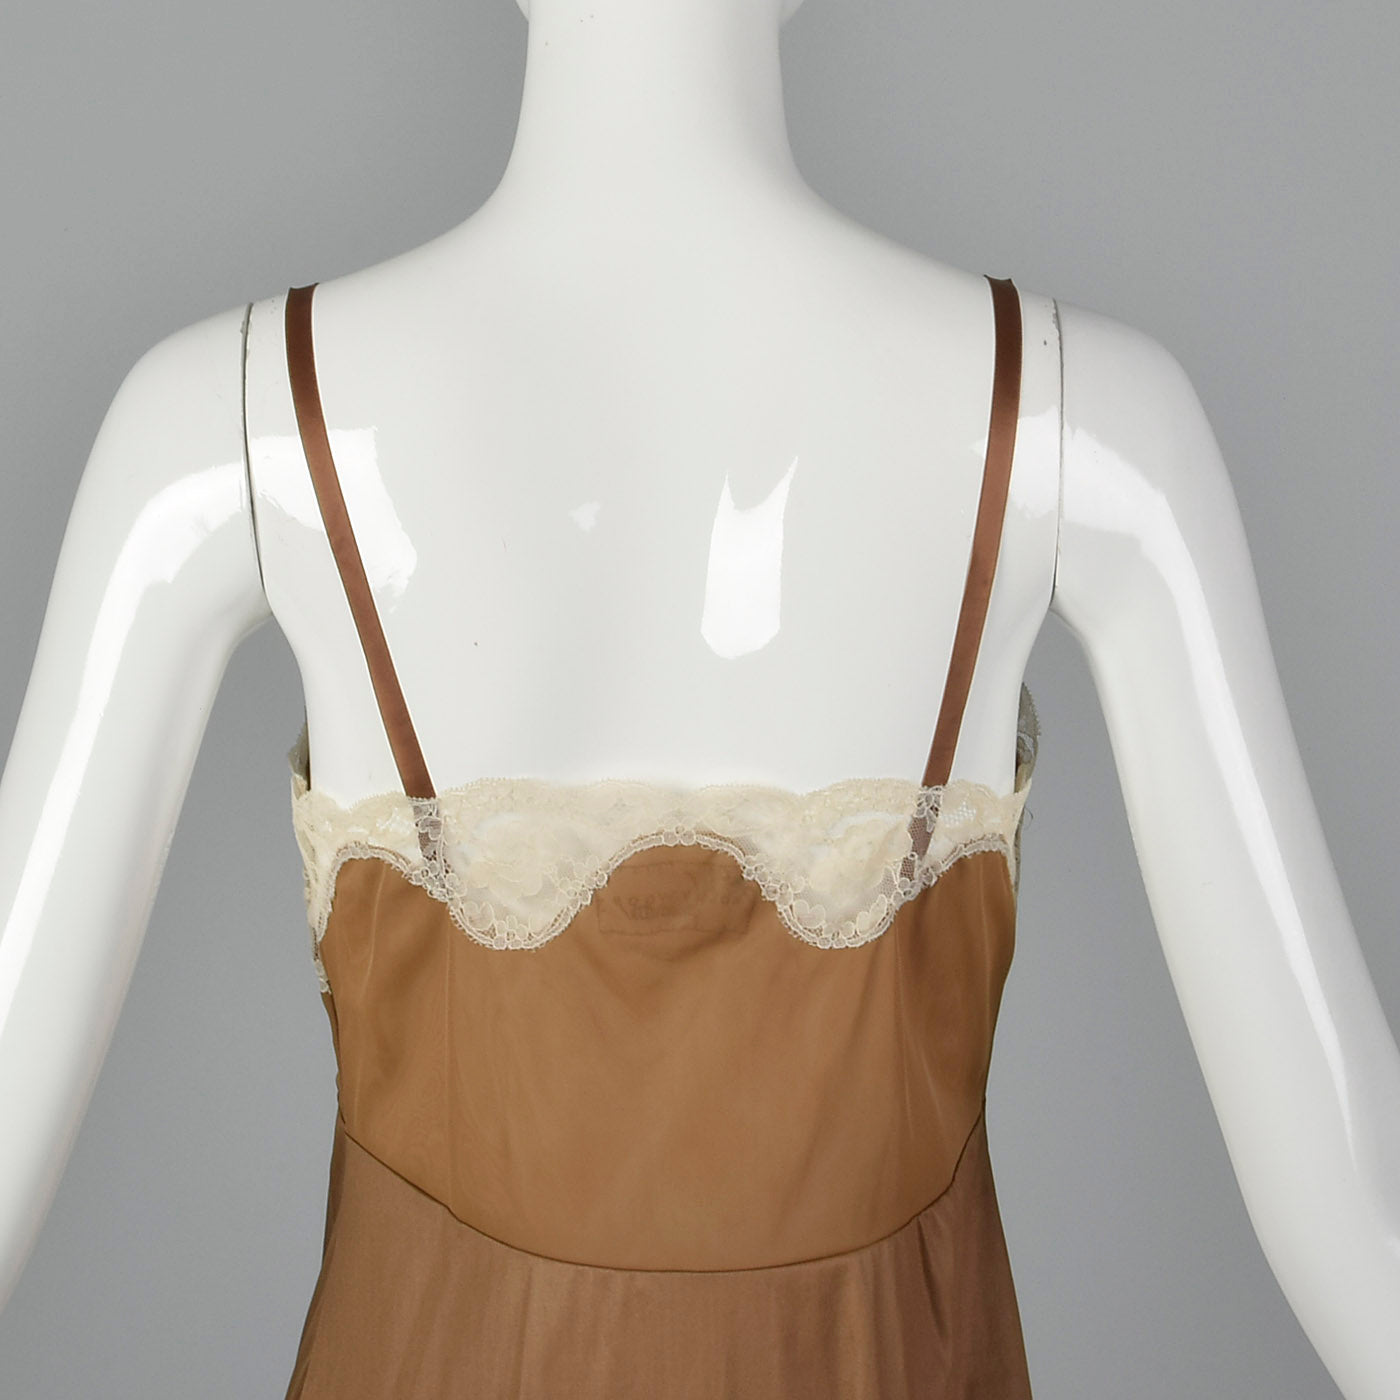 1950s Deadstock Full Slip with Lace Details